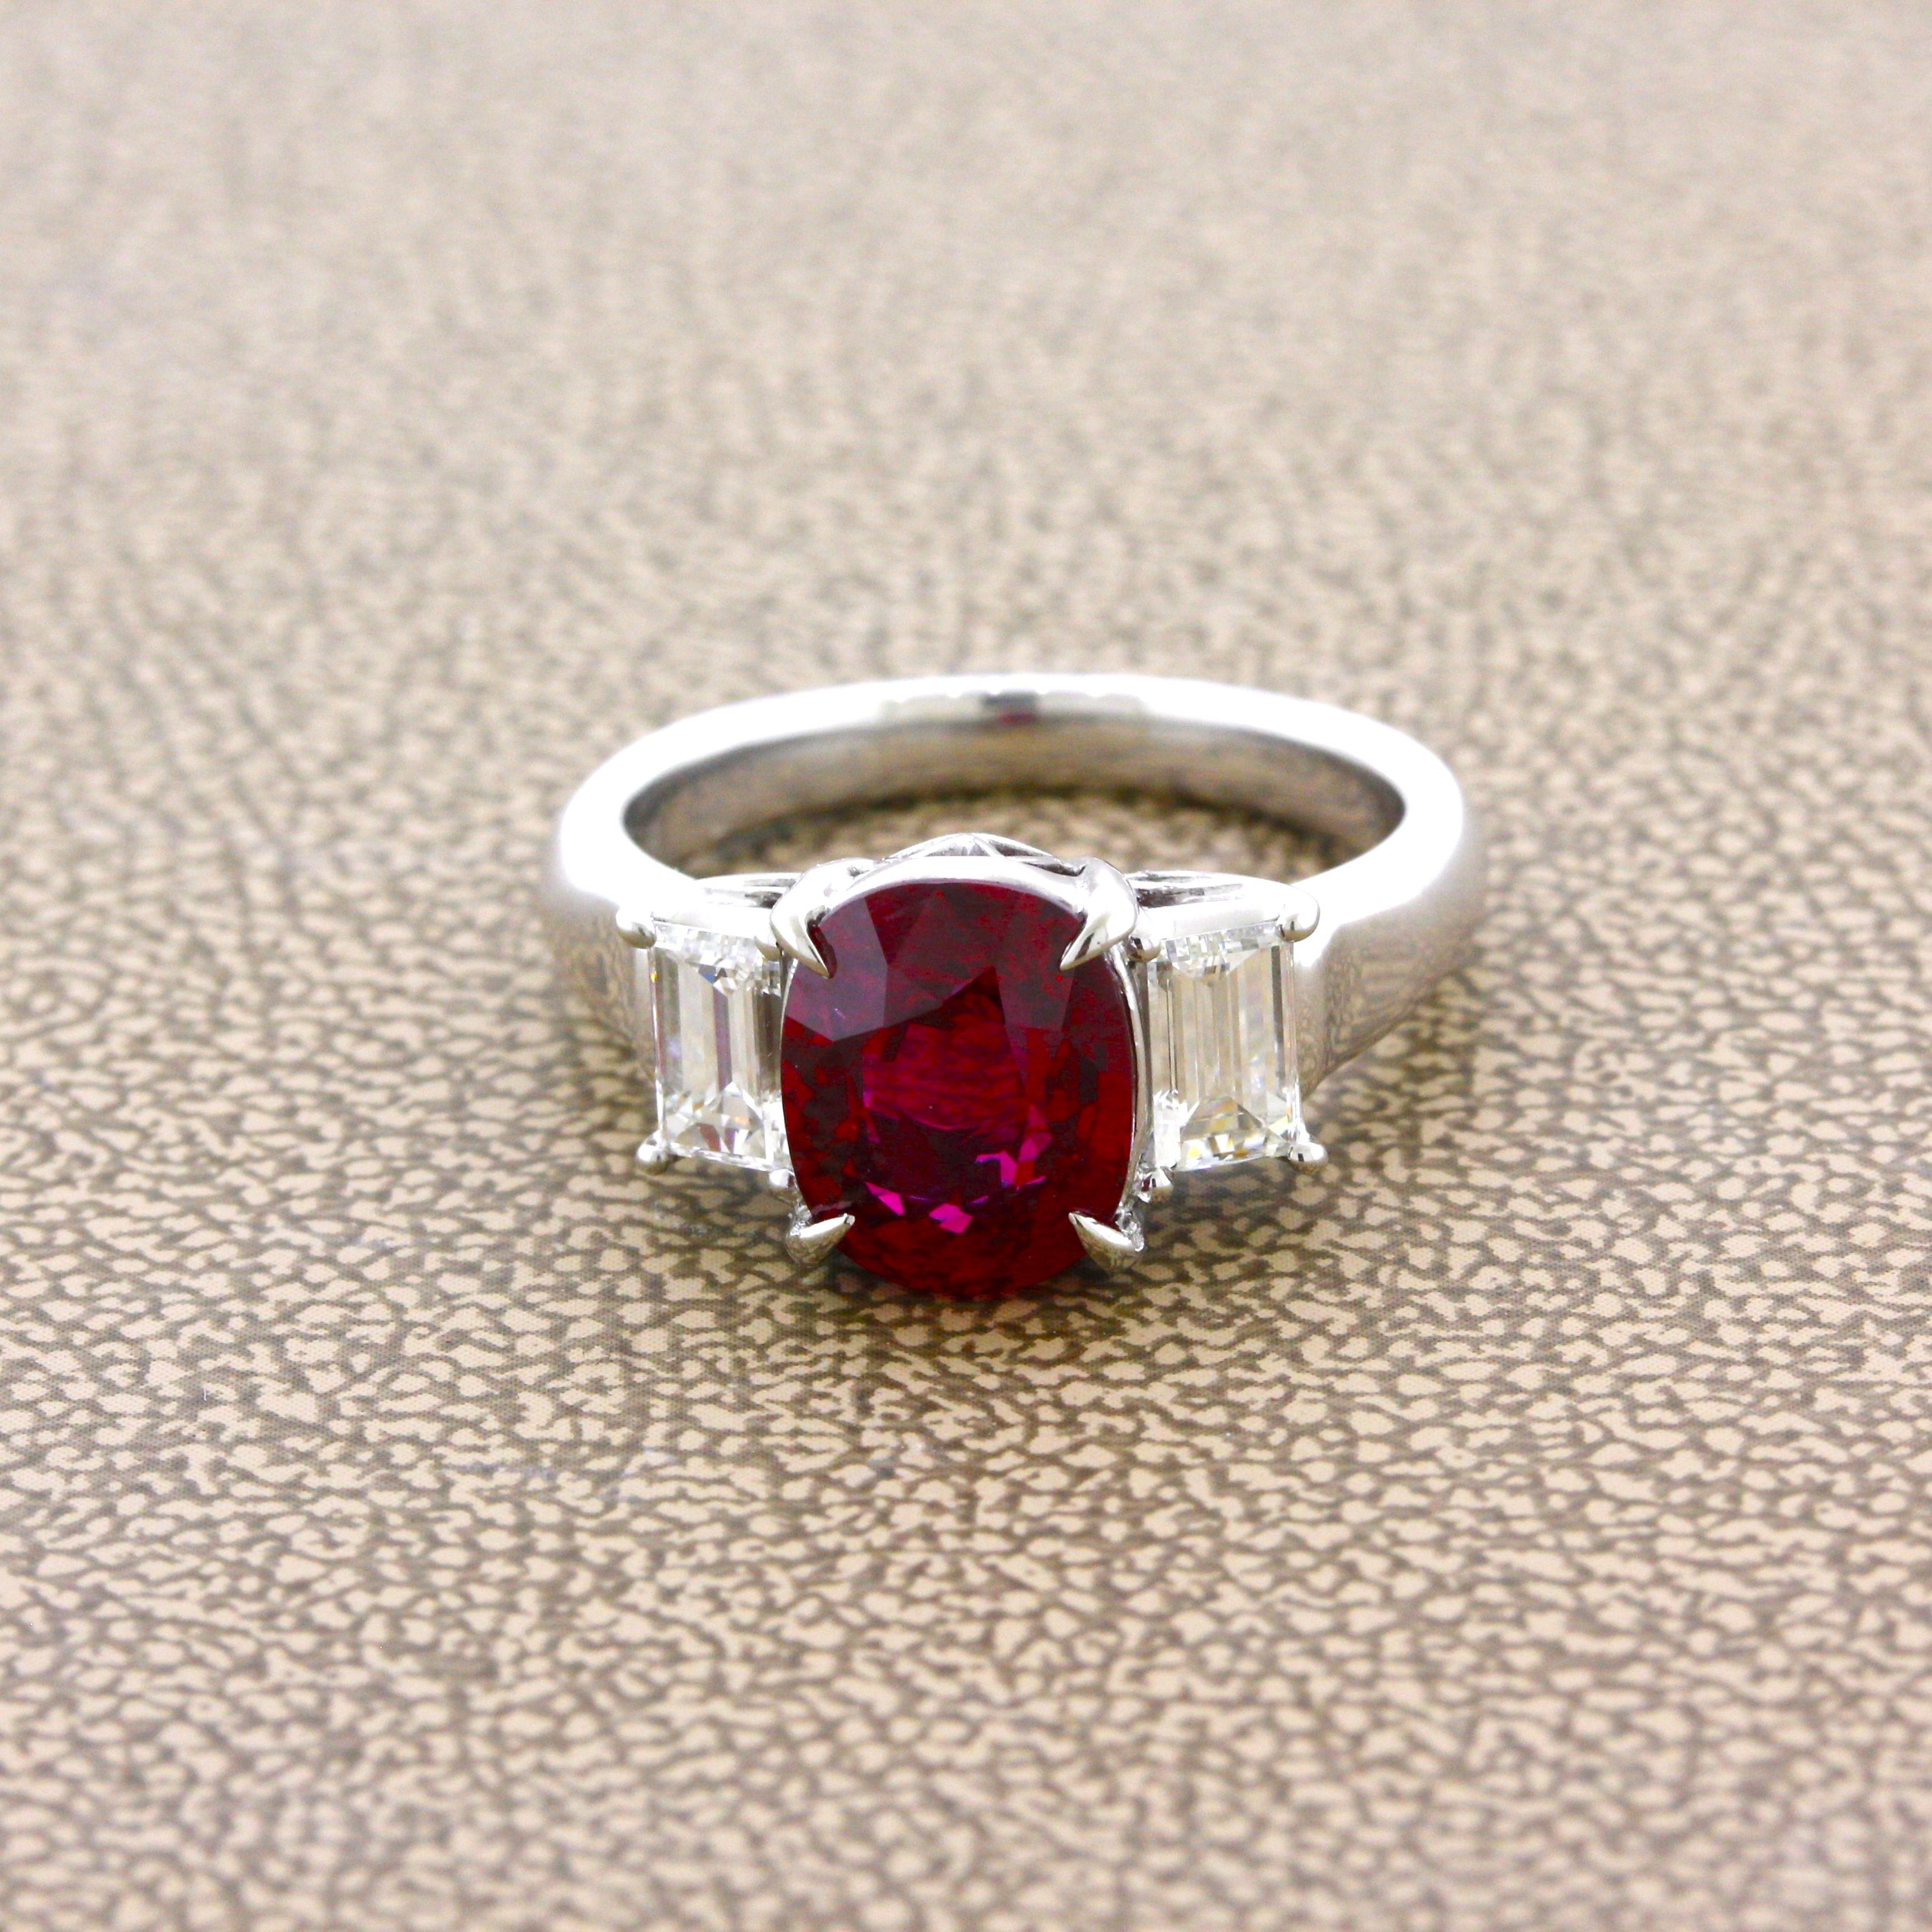 A superb gem quality ruby weighing an impressive 3.48 carats takes center stage. It has the most ideal, brilliant, vivid, and pure red color which seems out of this world. The oval-shaped gem ruby is one of the finest stones we have ever seen. It is